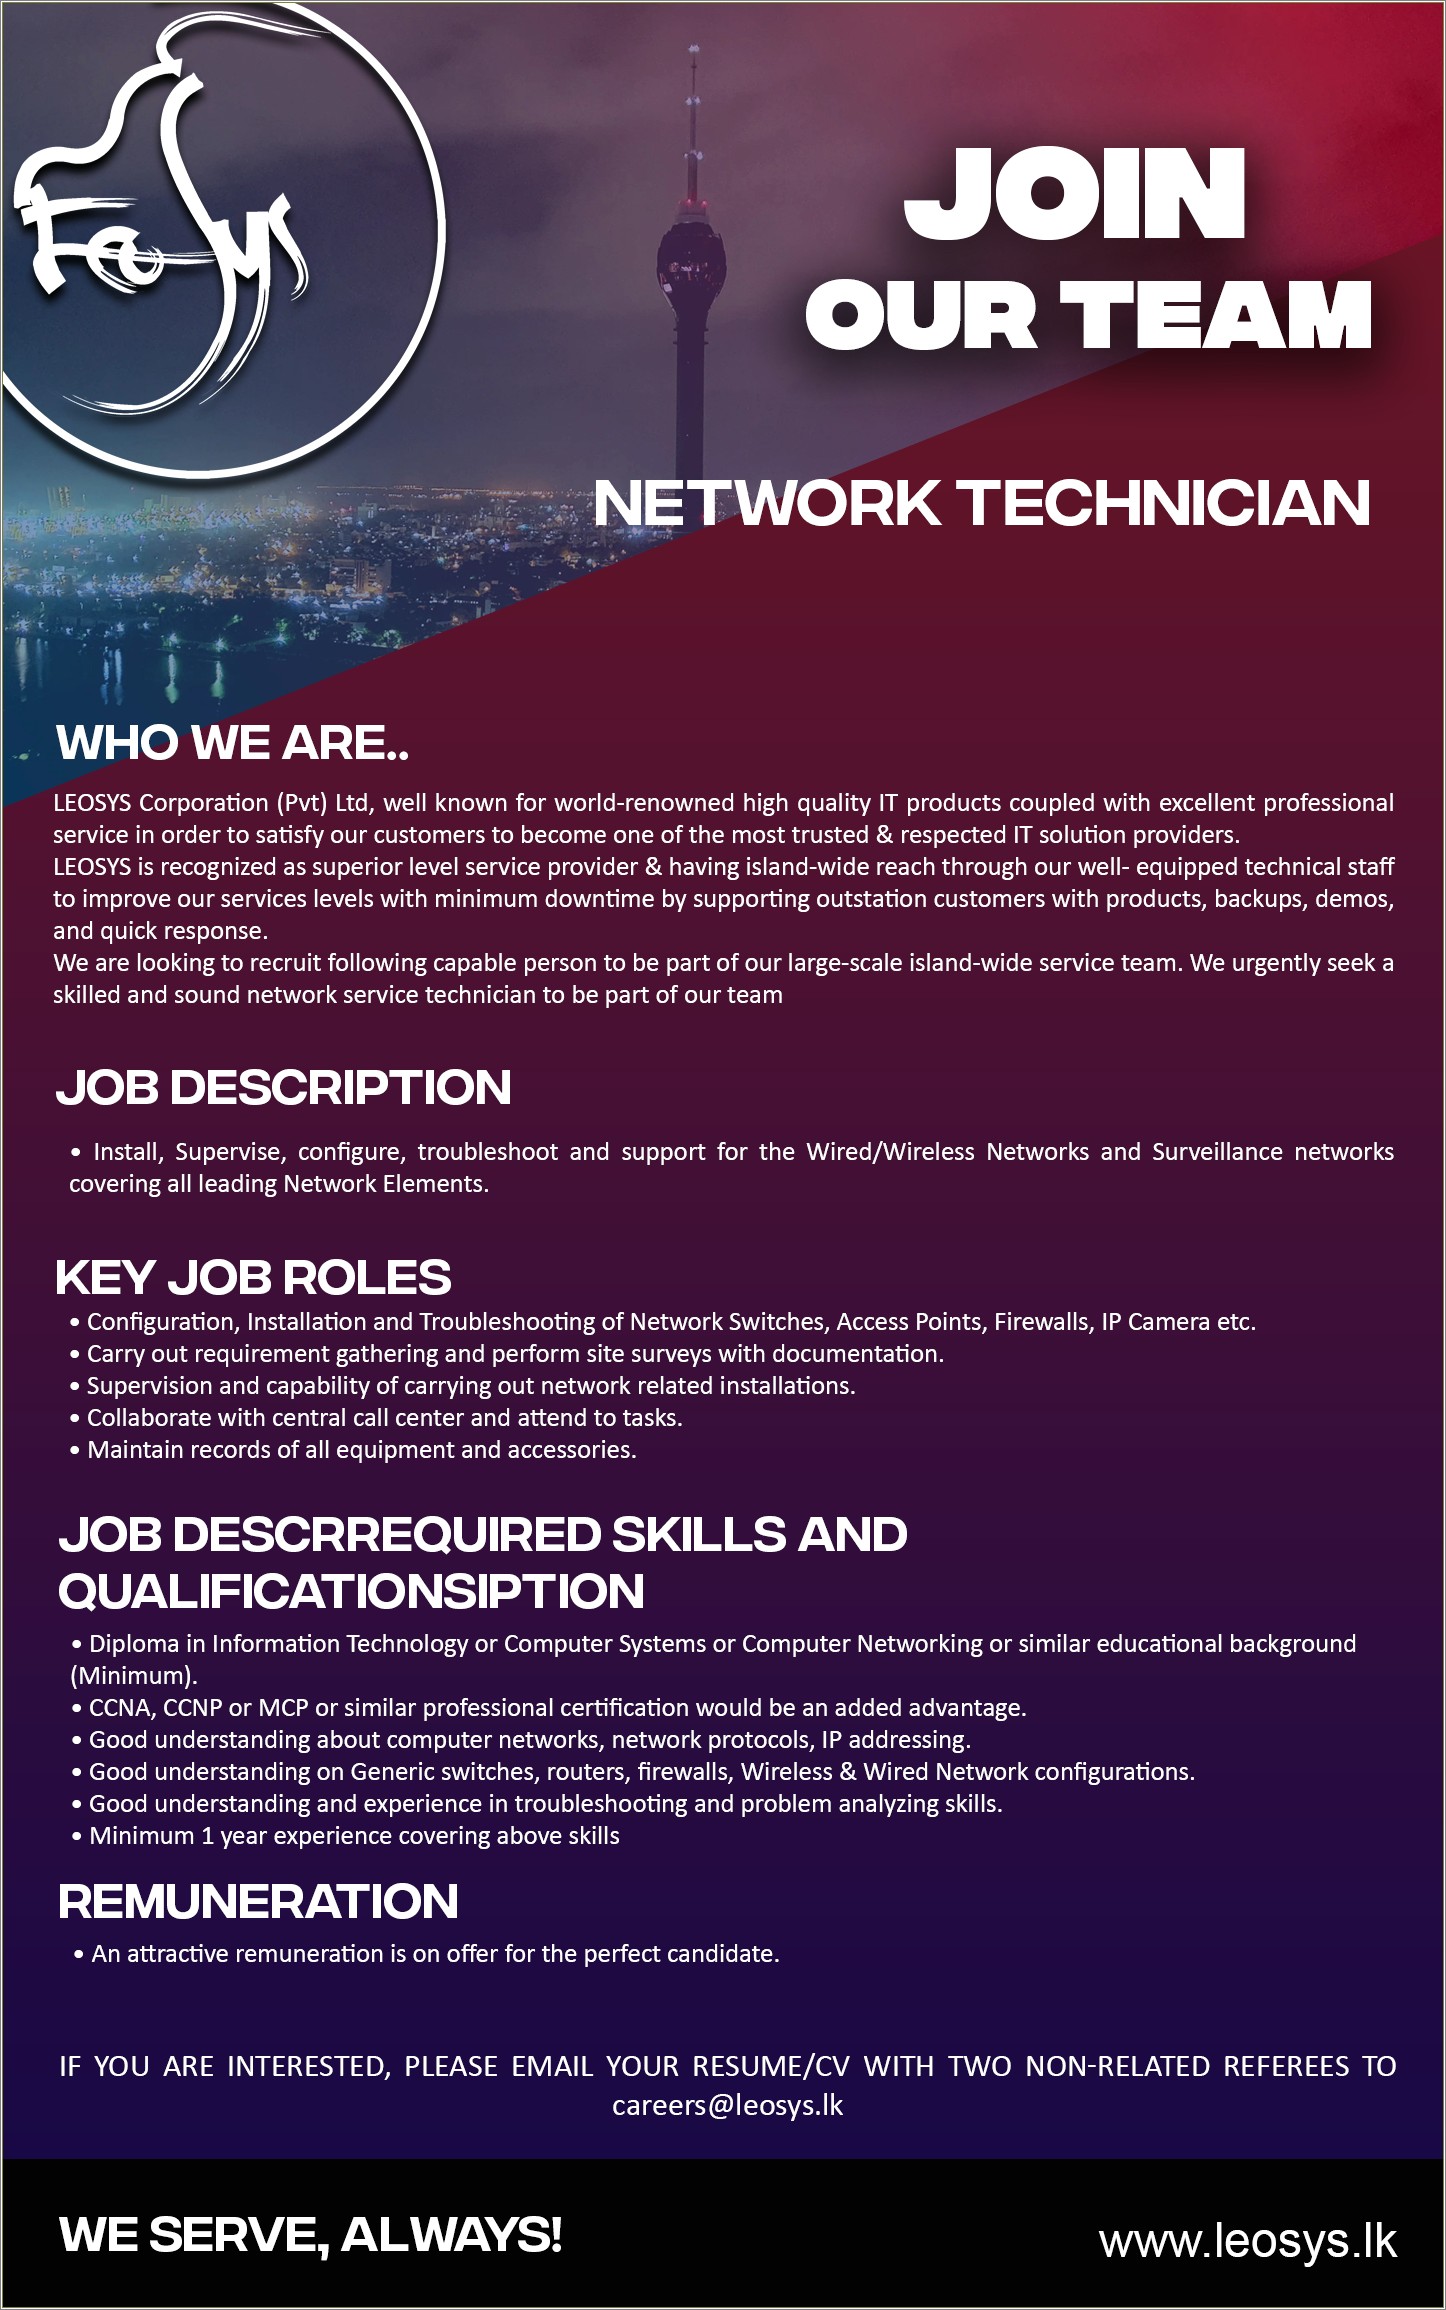 Ccna Resume With 2 Years Experience